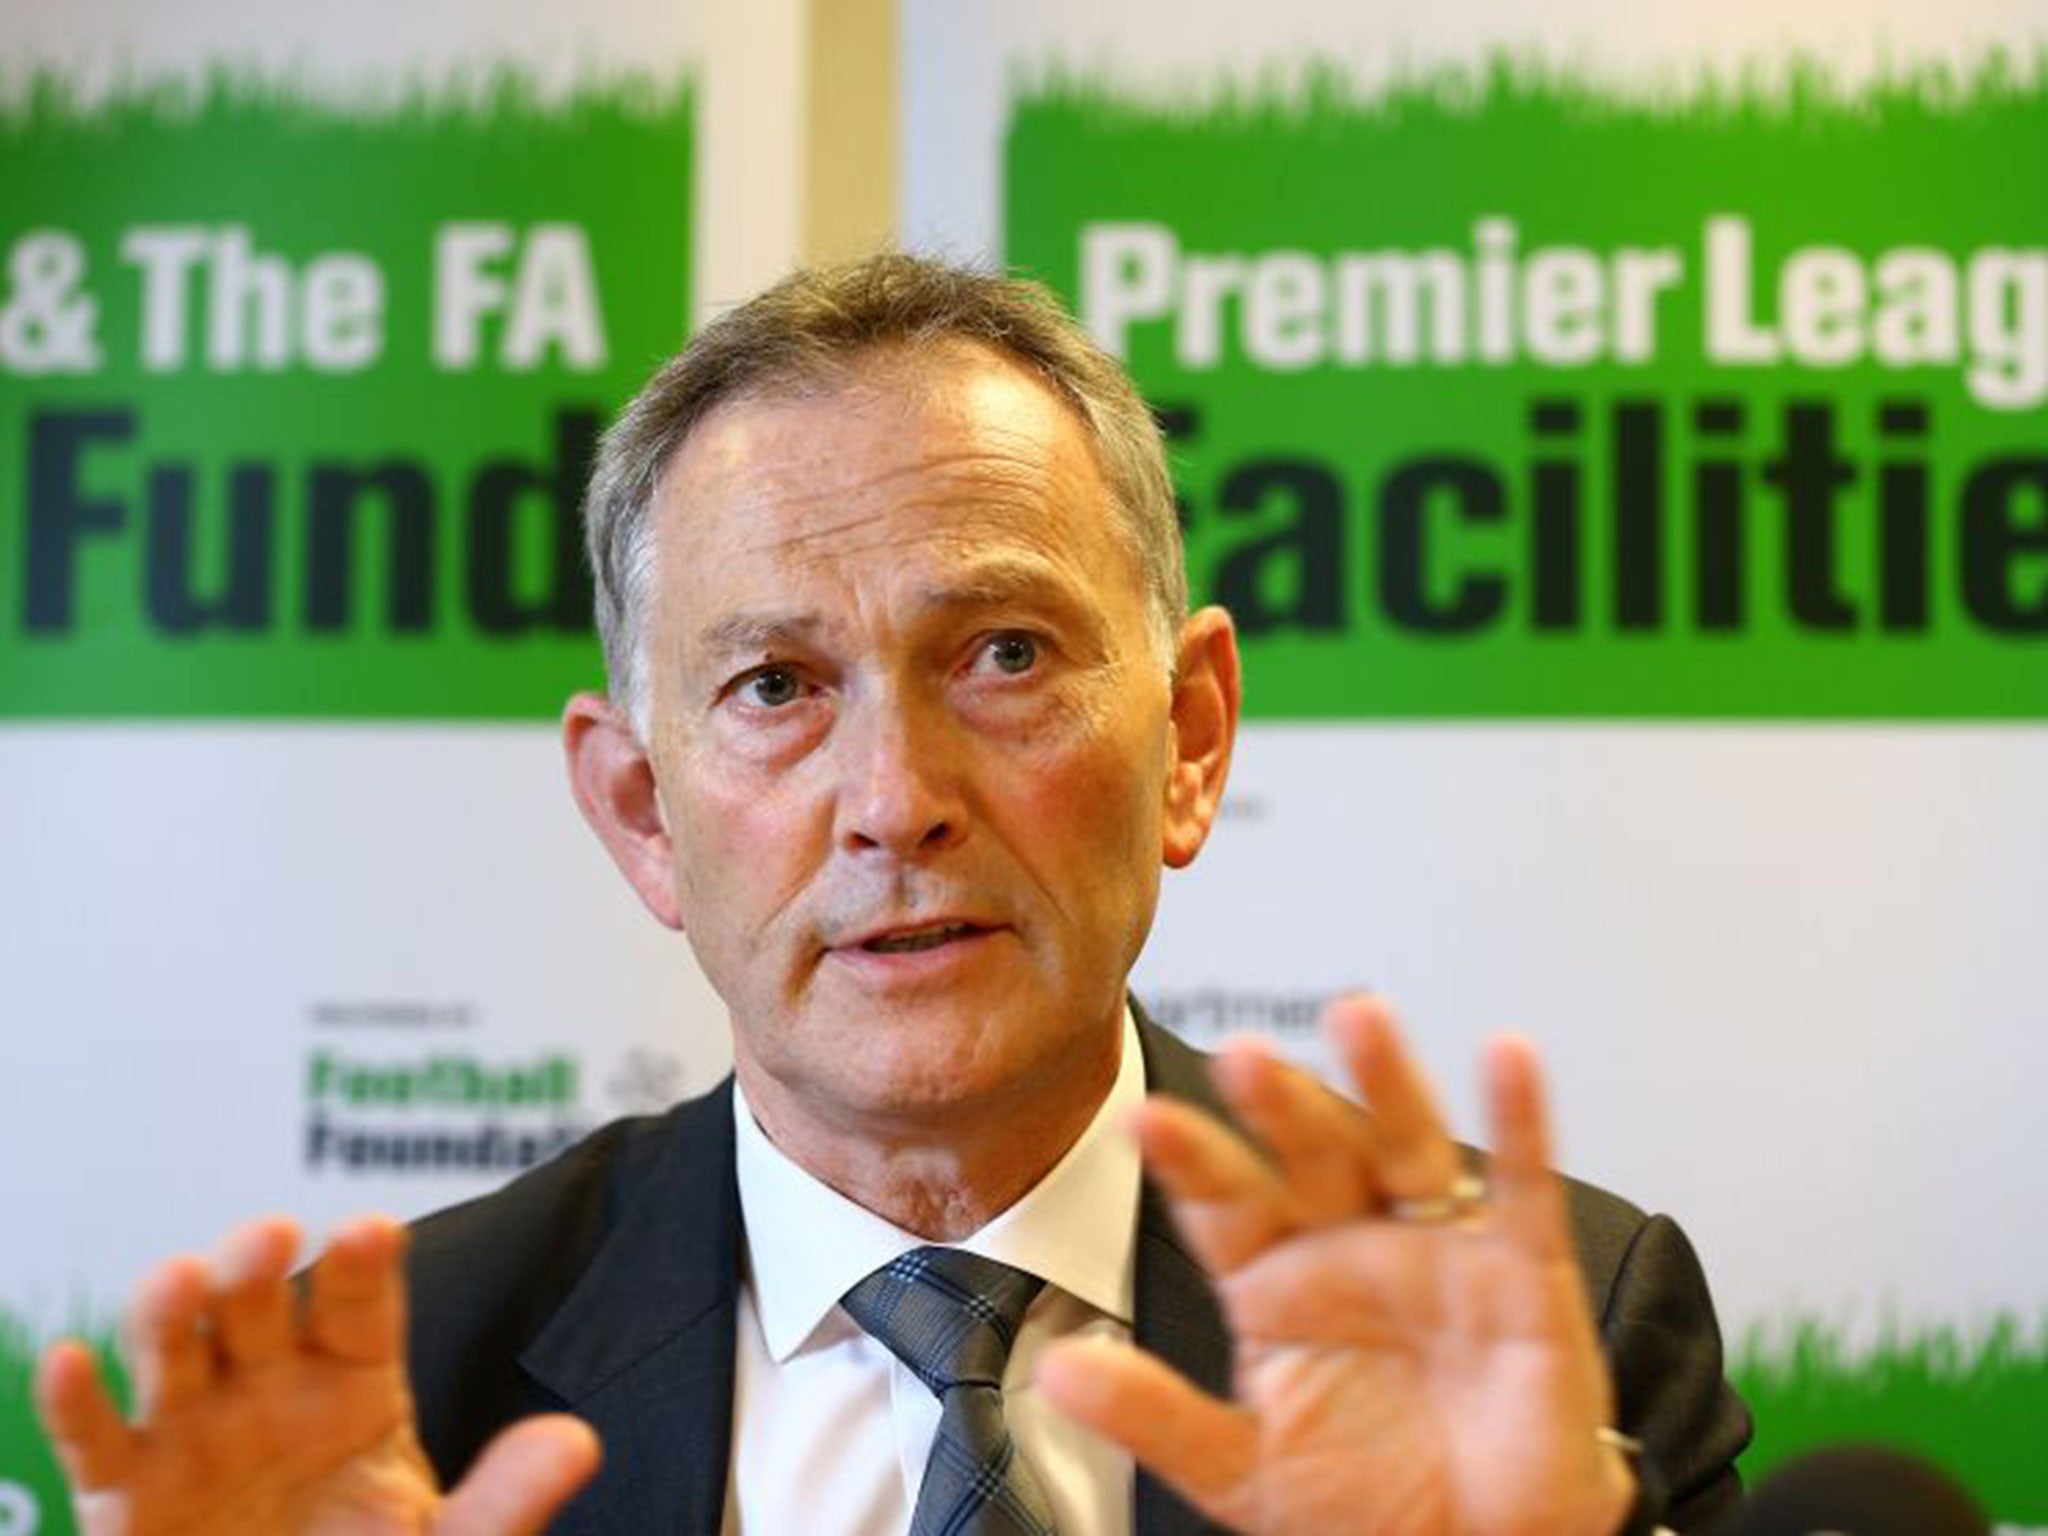 Richard Scudamore handled the publication of his emails badly and should have issued an immediate, fulsome apology